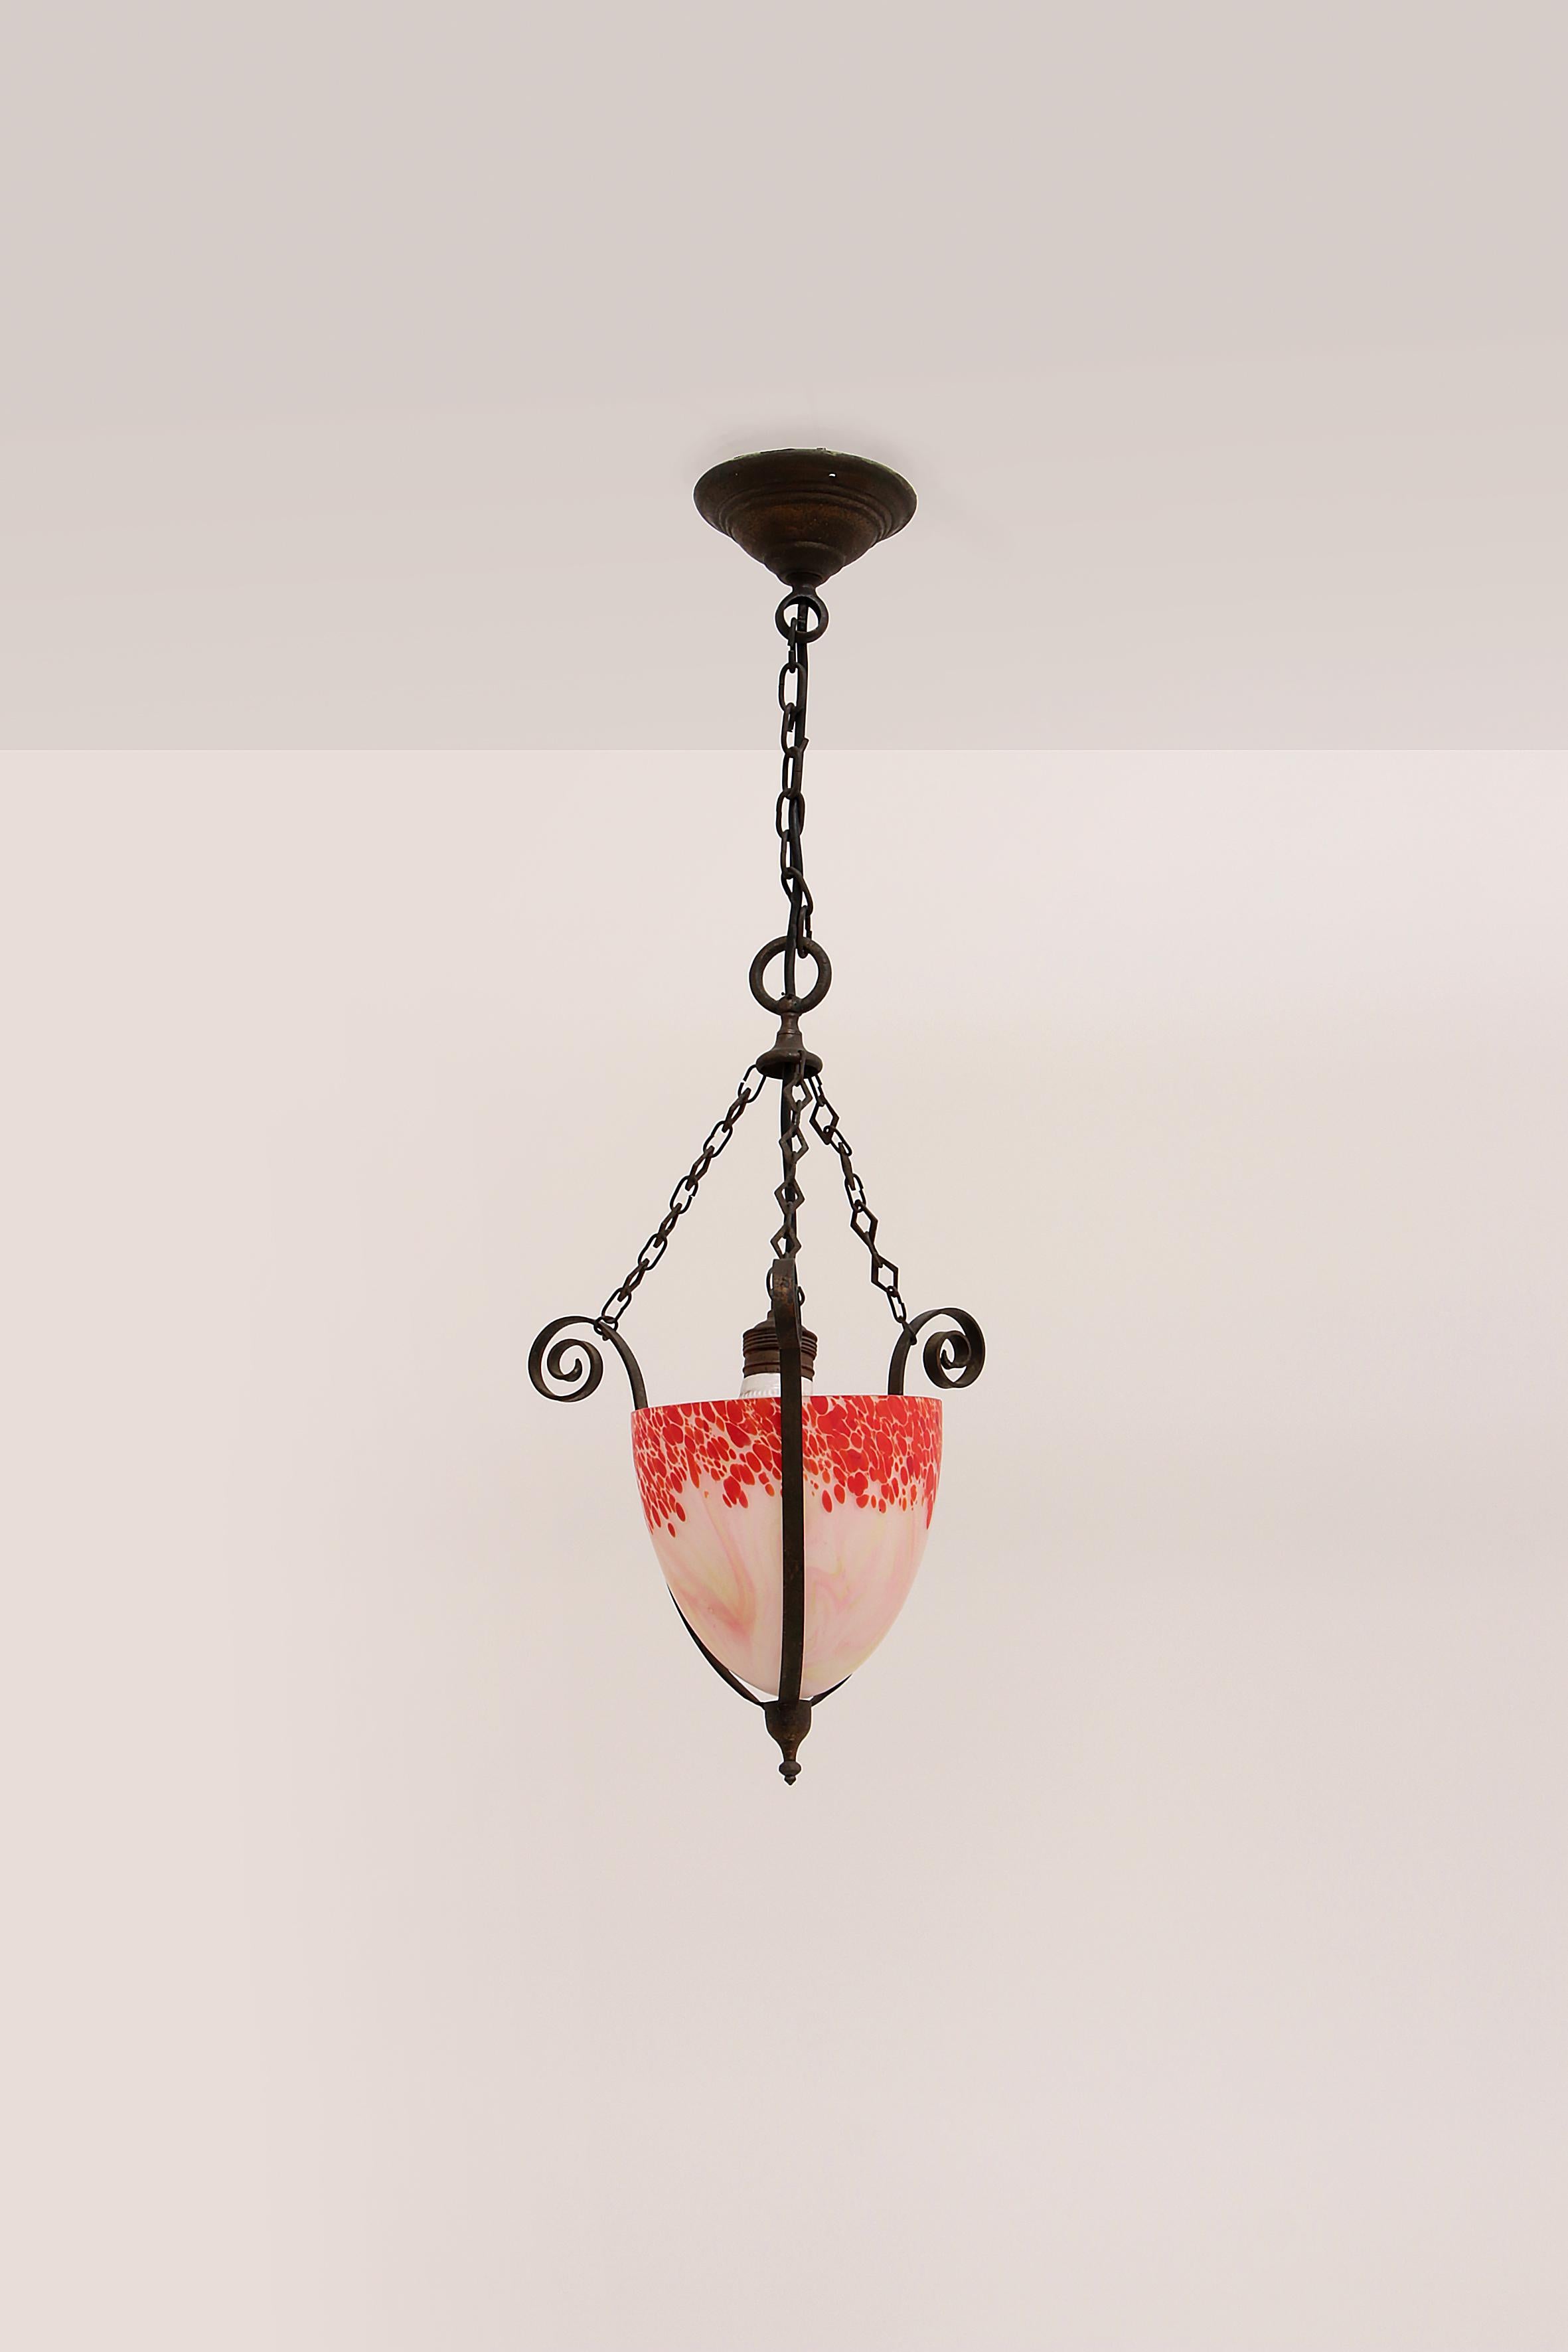 This beautiful Art Deco chandelier has amazing colors and beautiful brass details.
This very rich hanging chandelier from the French Art Nouveau period has amazing color gradations in the shade. When this lamp is lit, this is accentuated even more